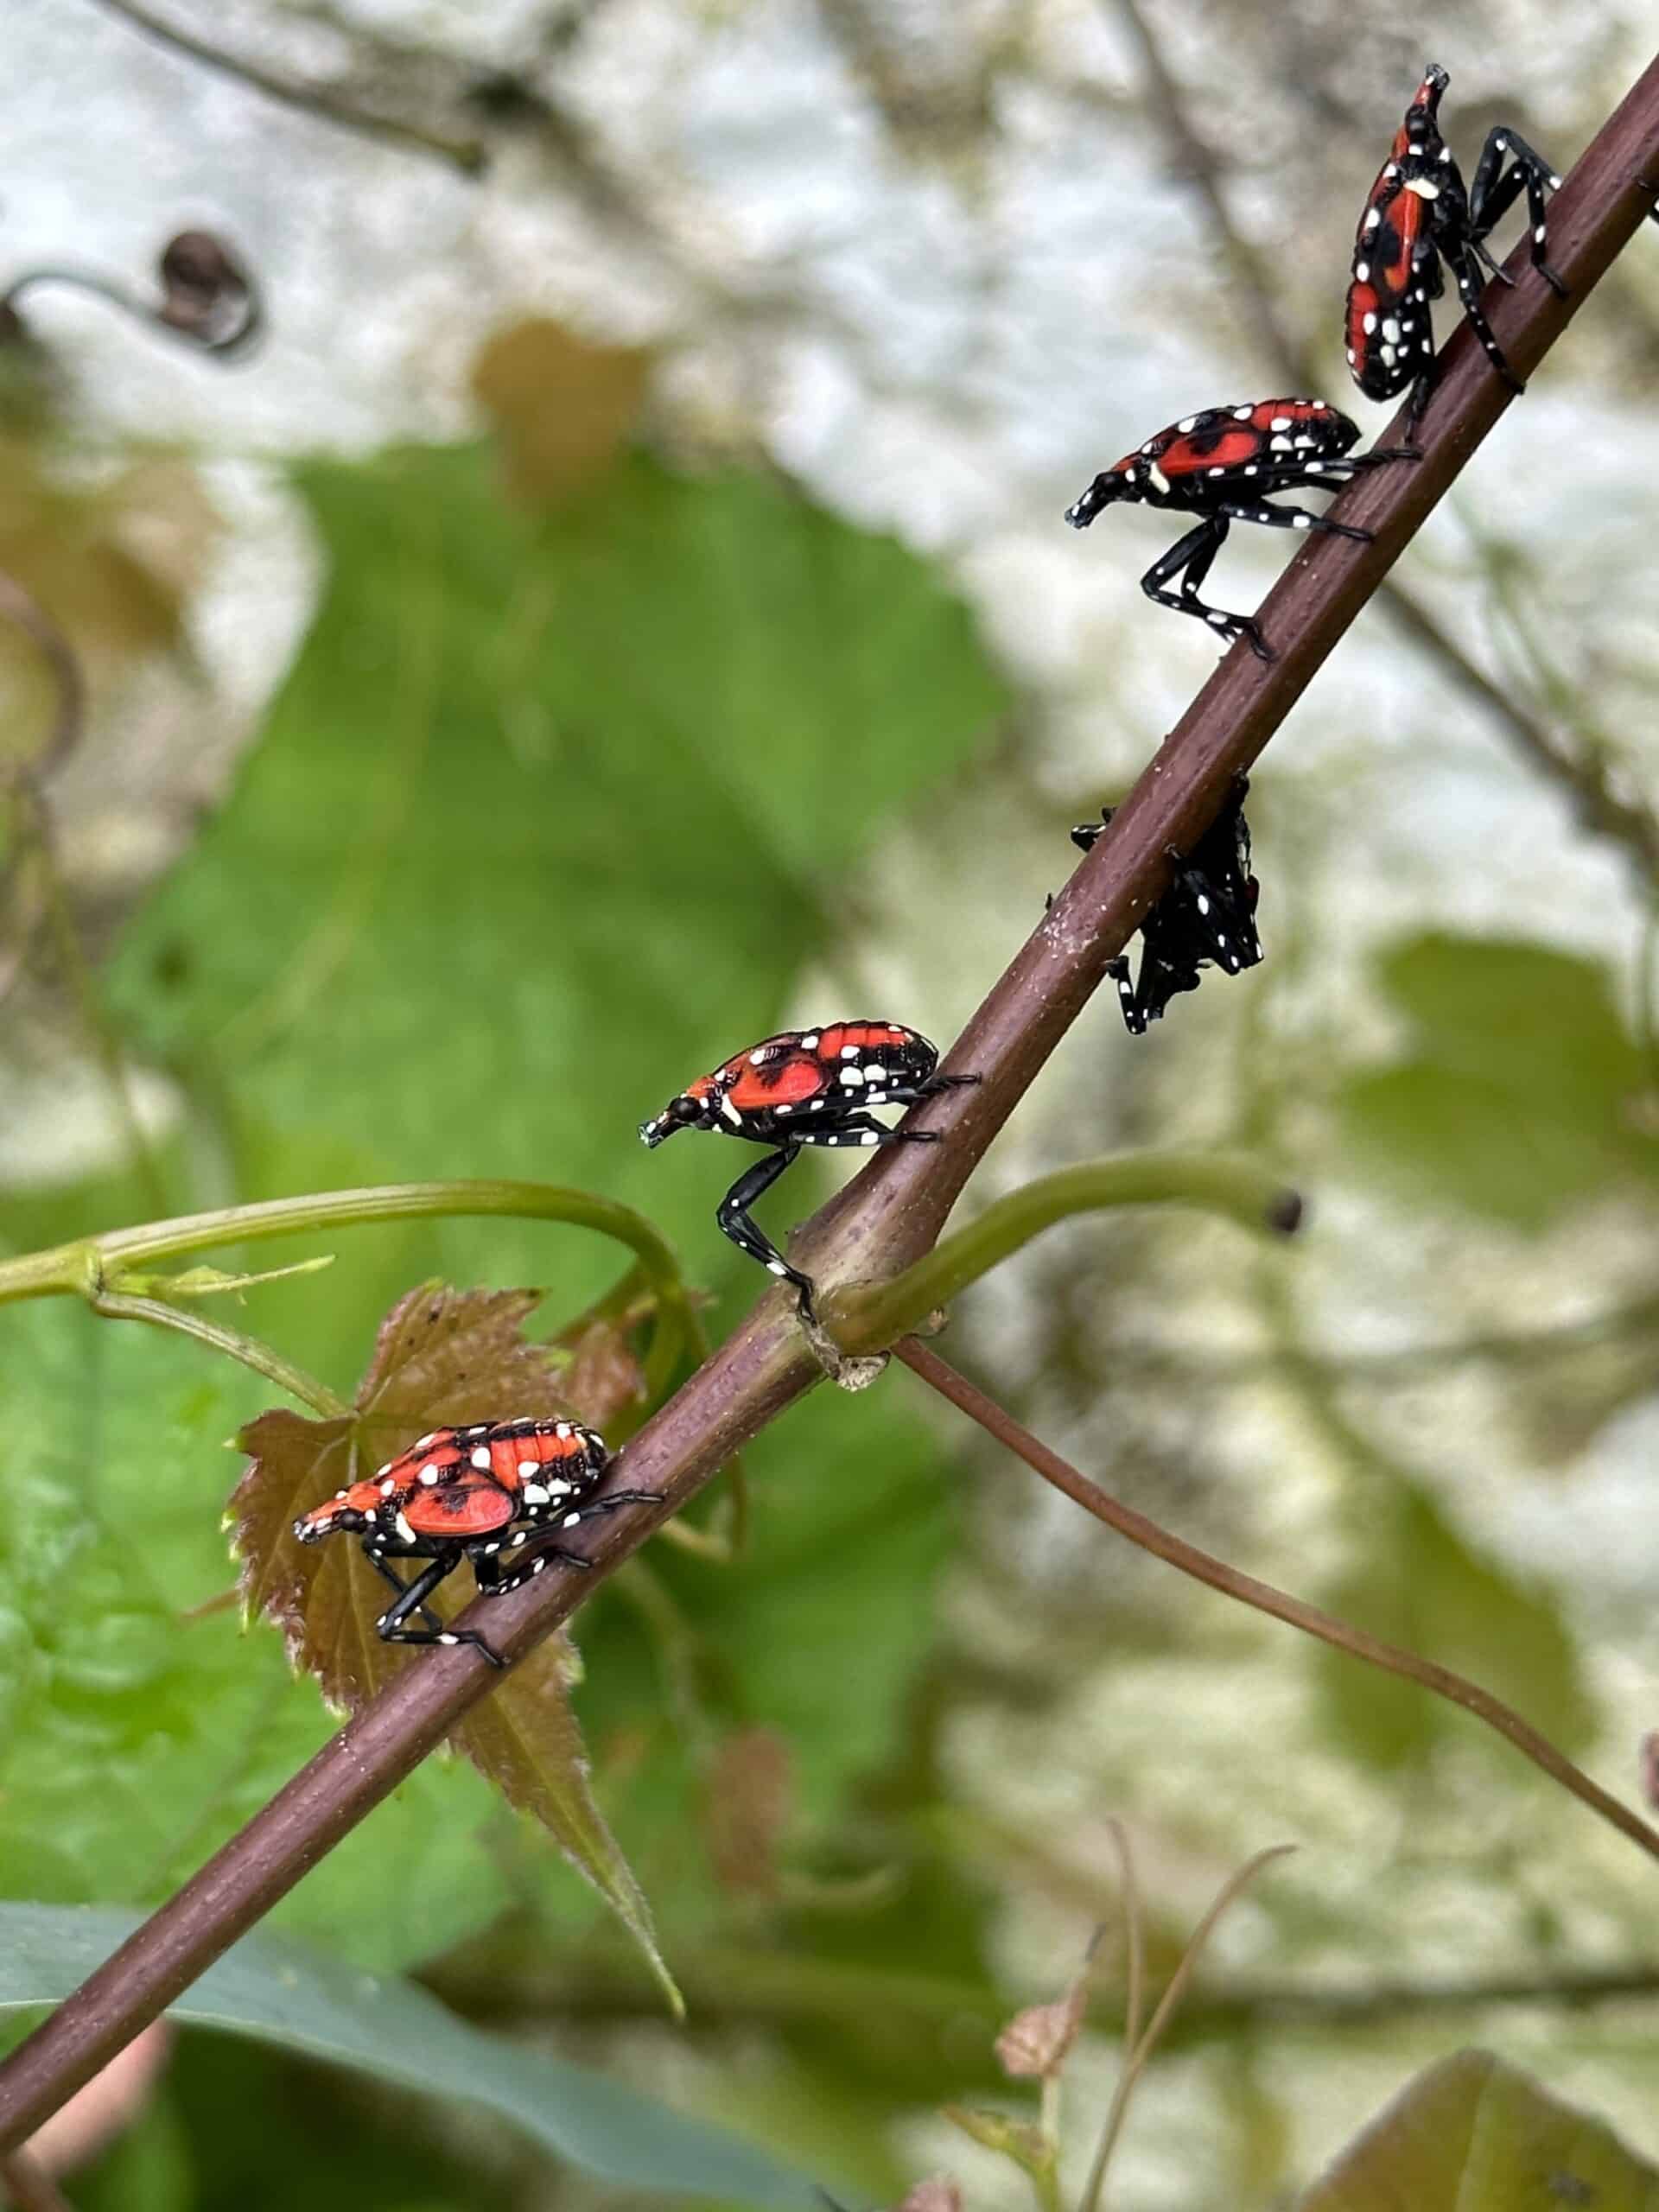 Spotted lanternfly juvenile insects on grapevine